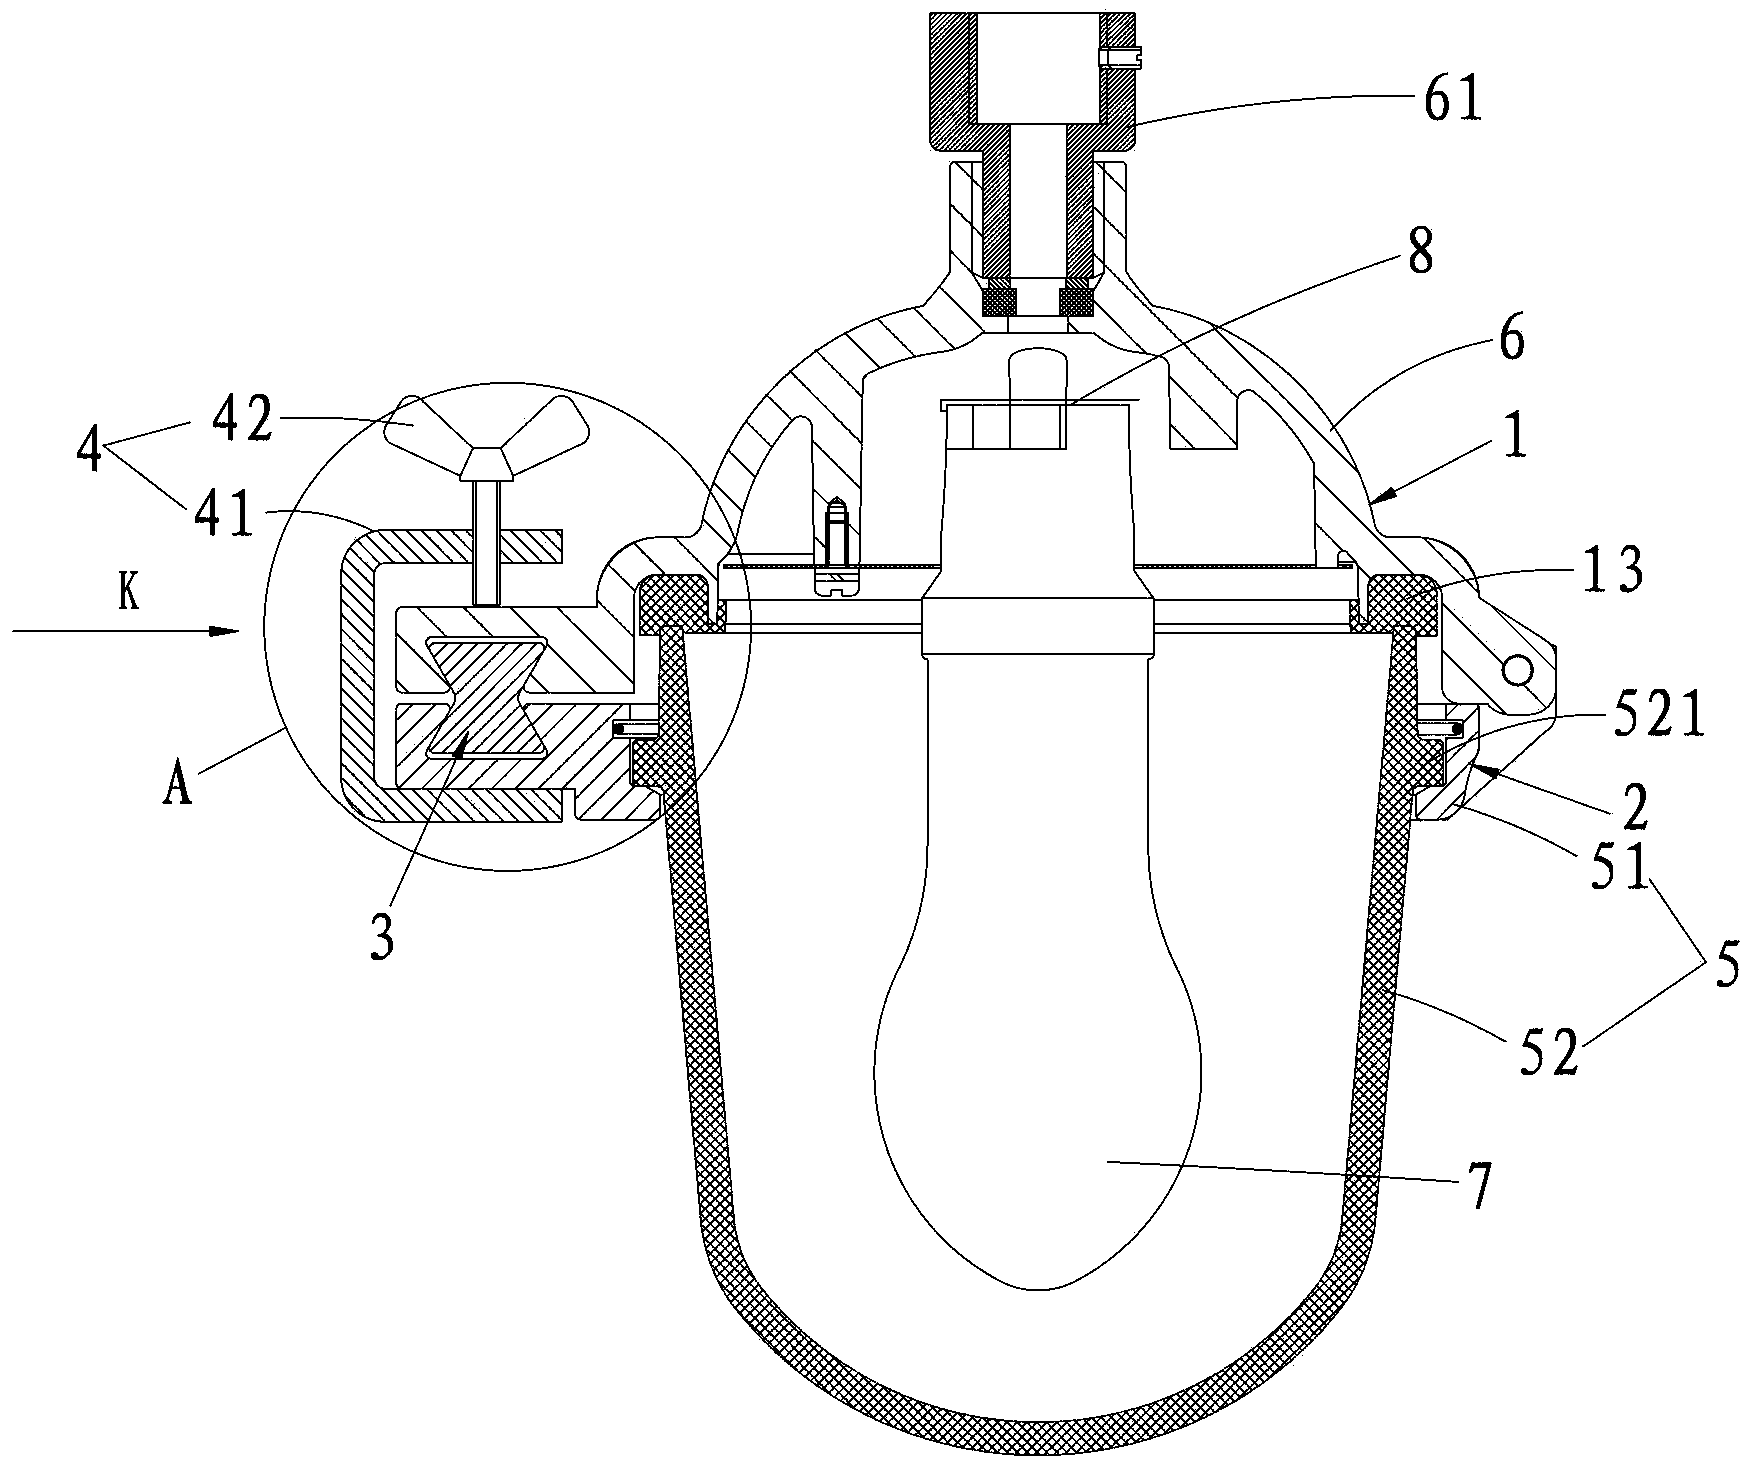 Shell body locking structure and lamp